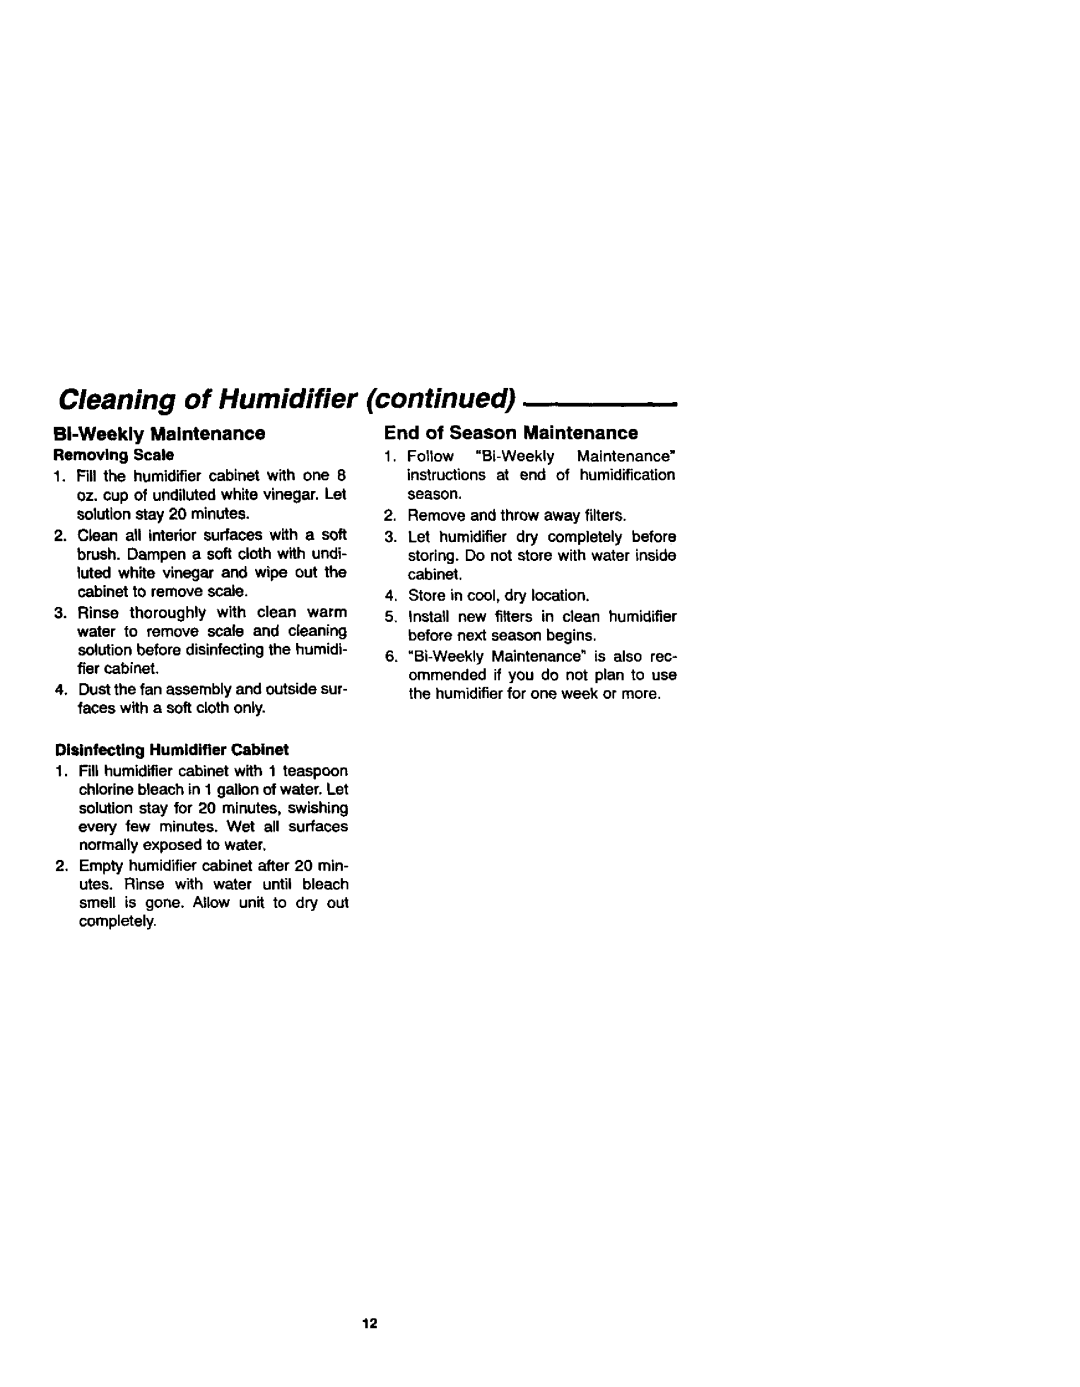 Sears 758.144131 owner manual Cleaning of Humidifier, continued 